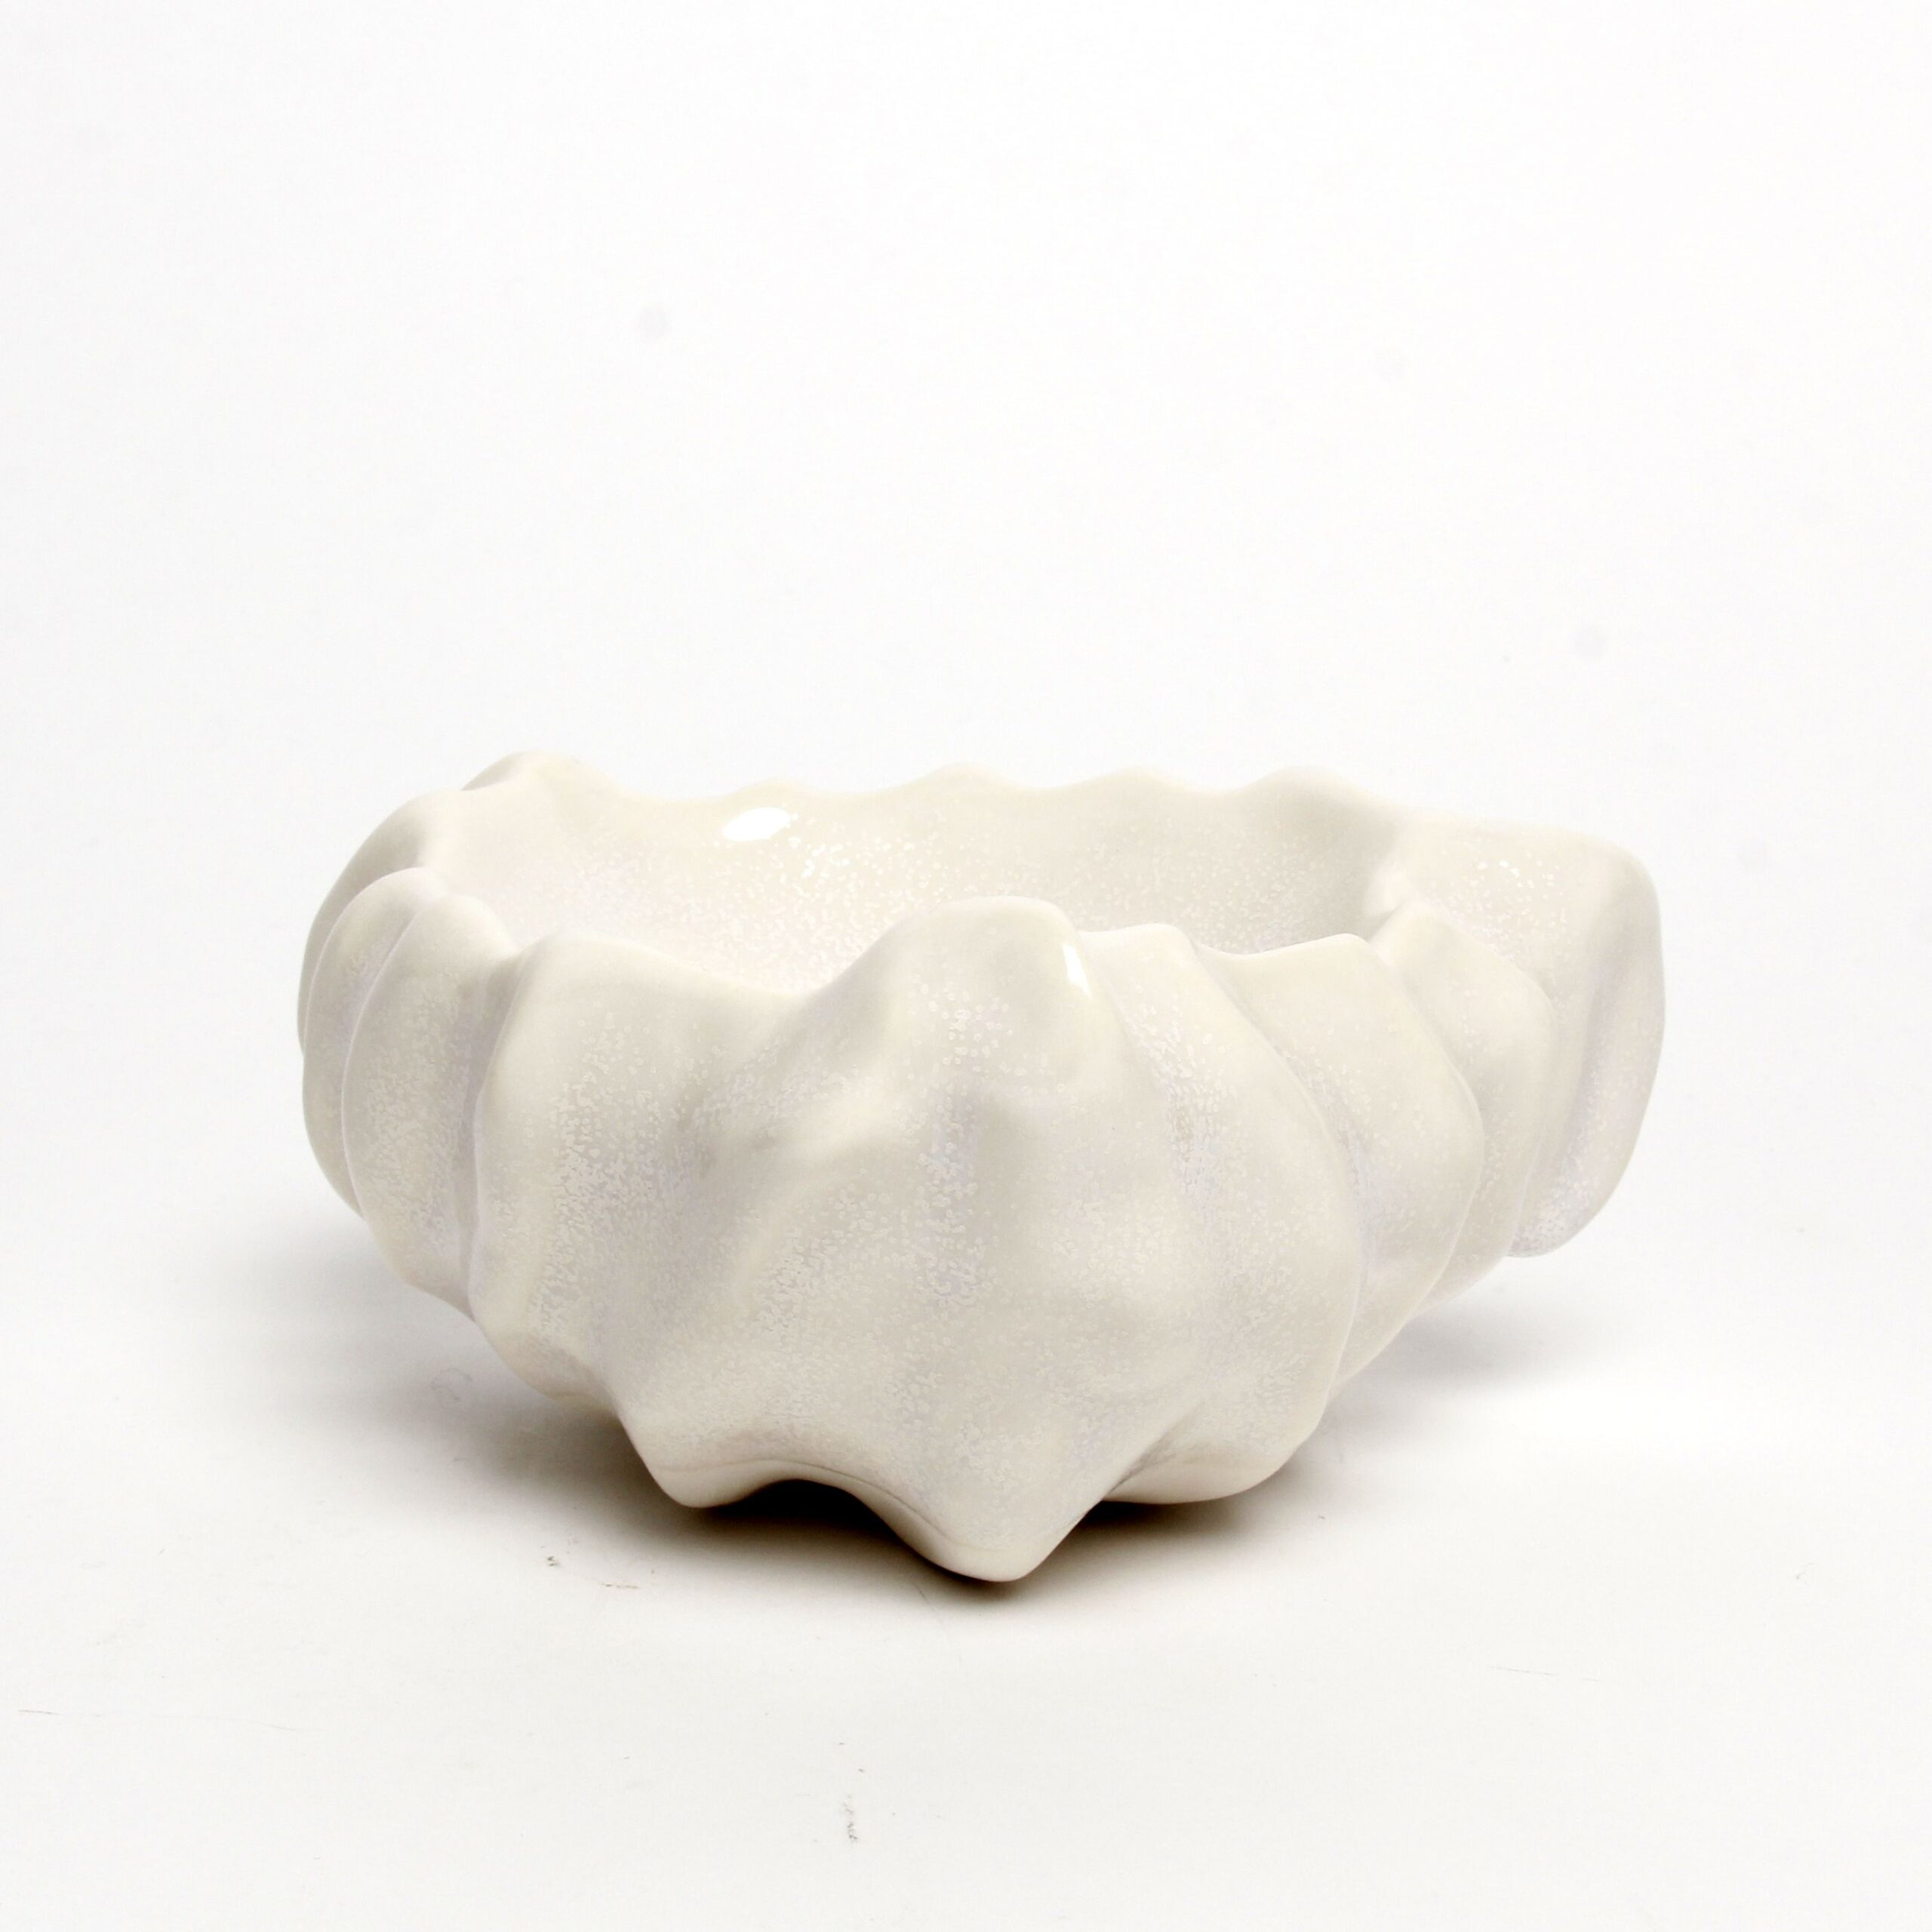 William Lee: Triangle Bowl in White Product Image 1 of 3